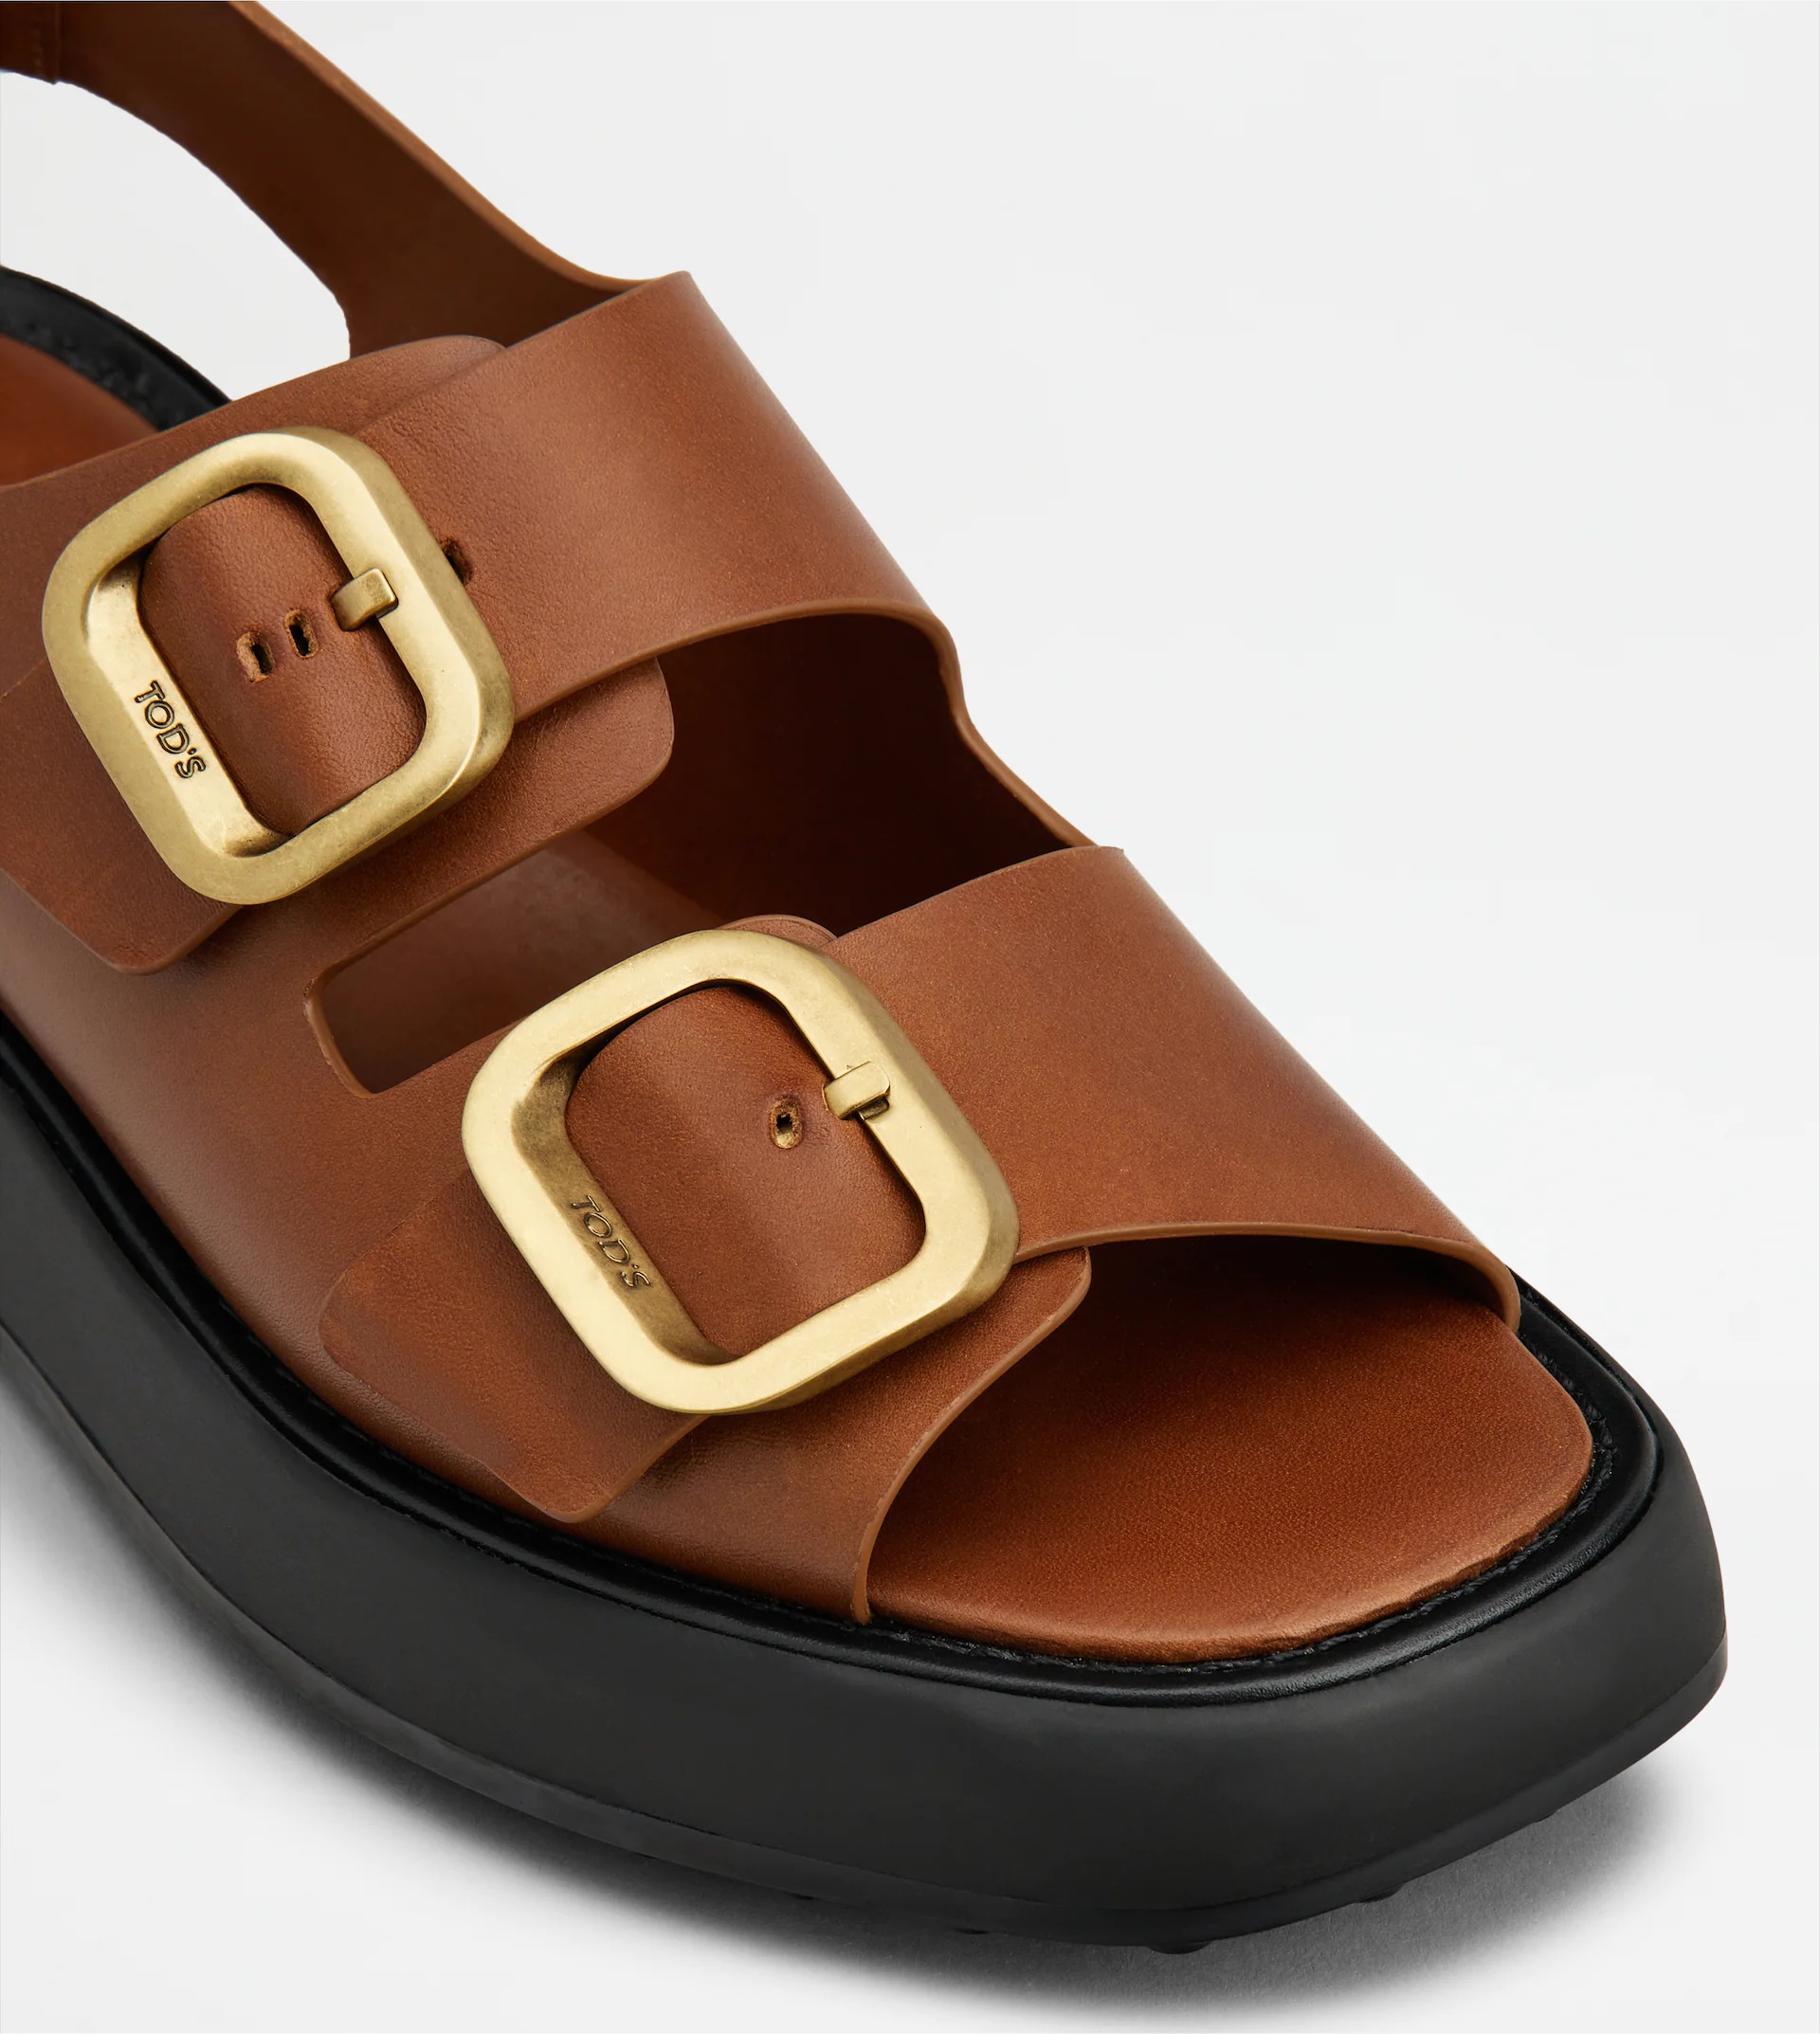 SANDALS IN LEATHER - BROWN - 5